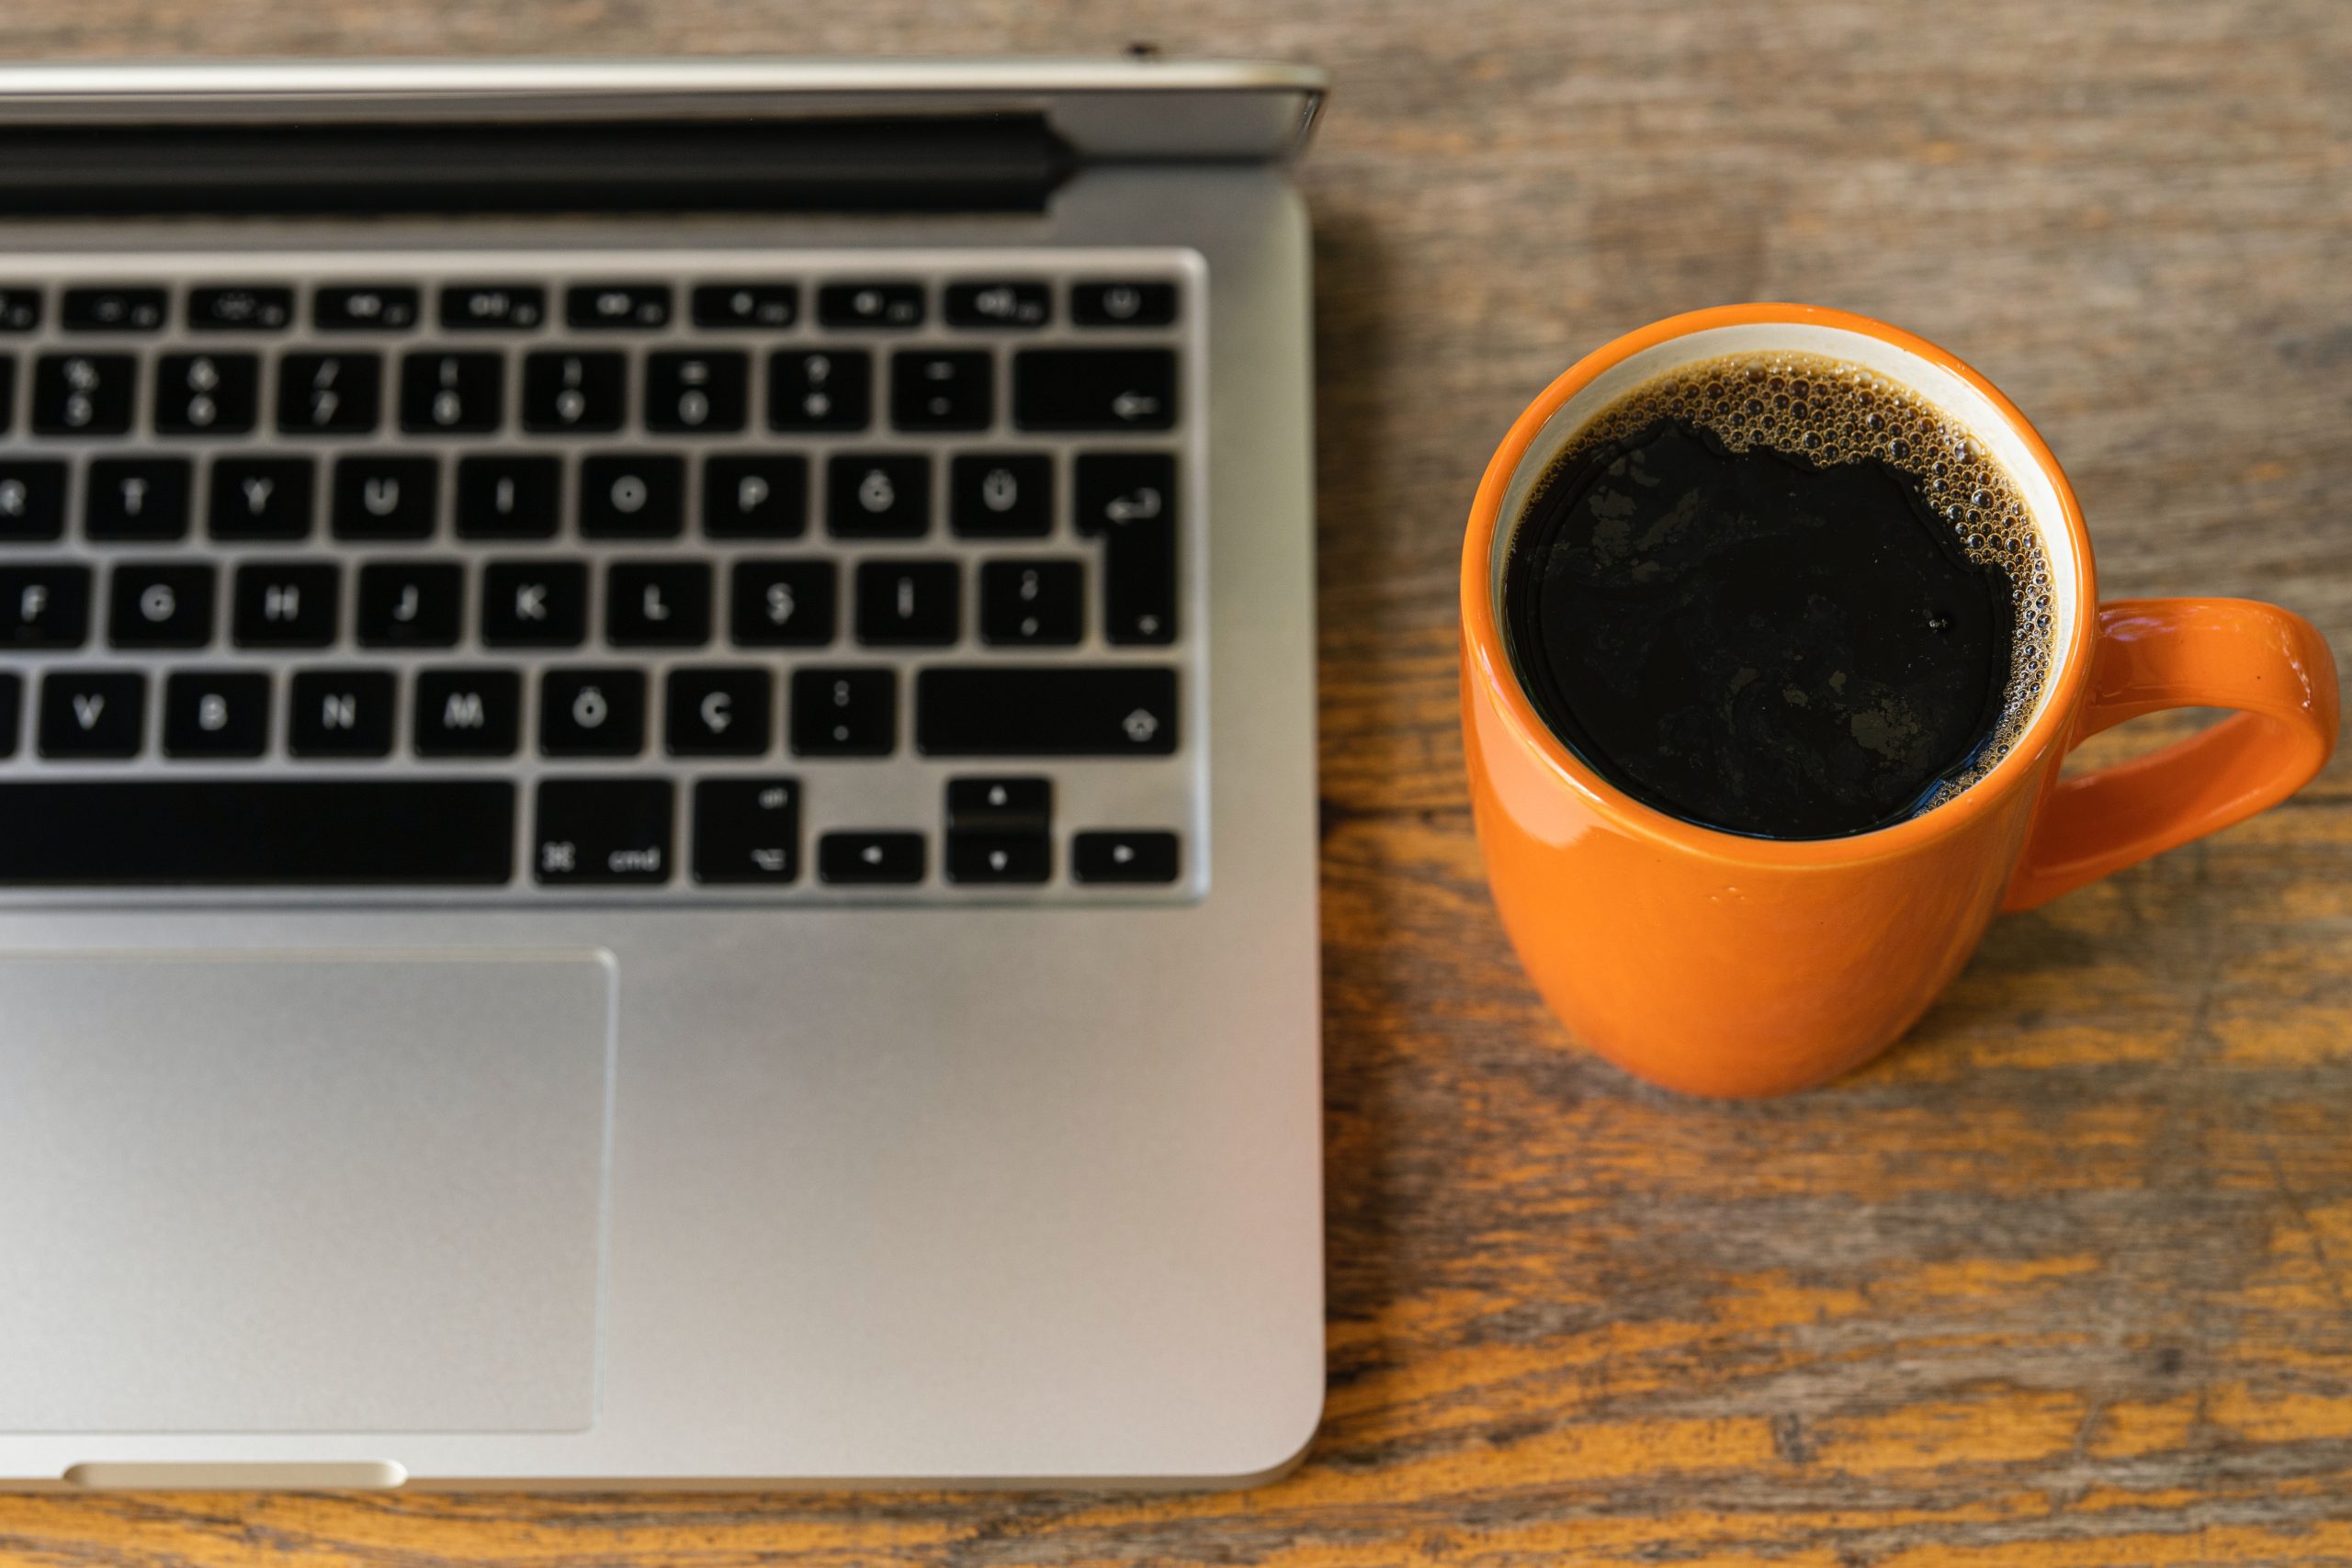 A orange mug of coffee sit next to a silver, opened laptop on a wooden desk.